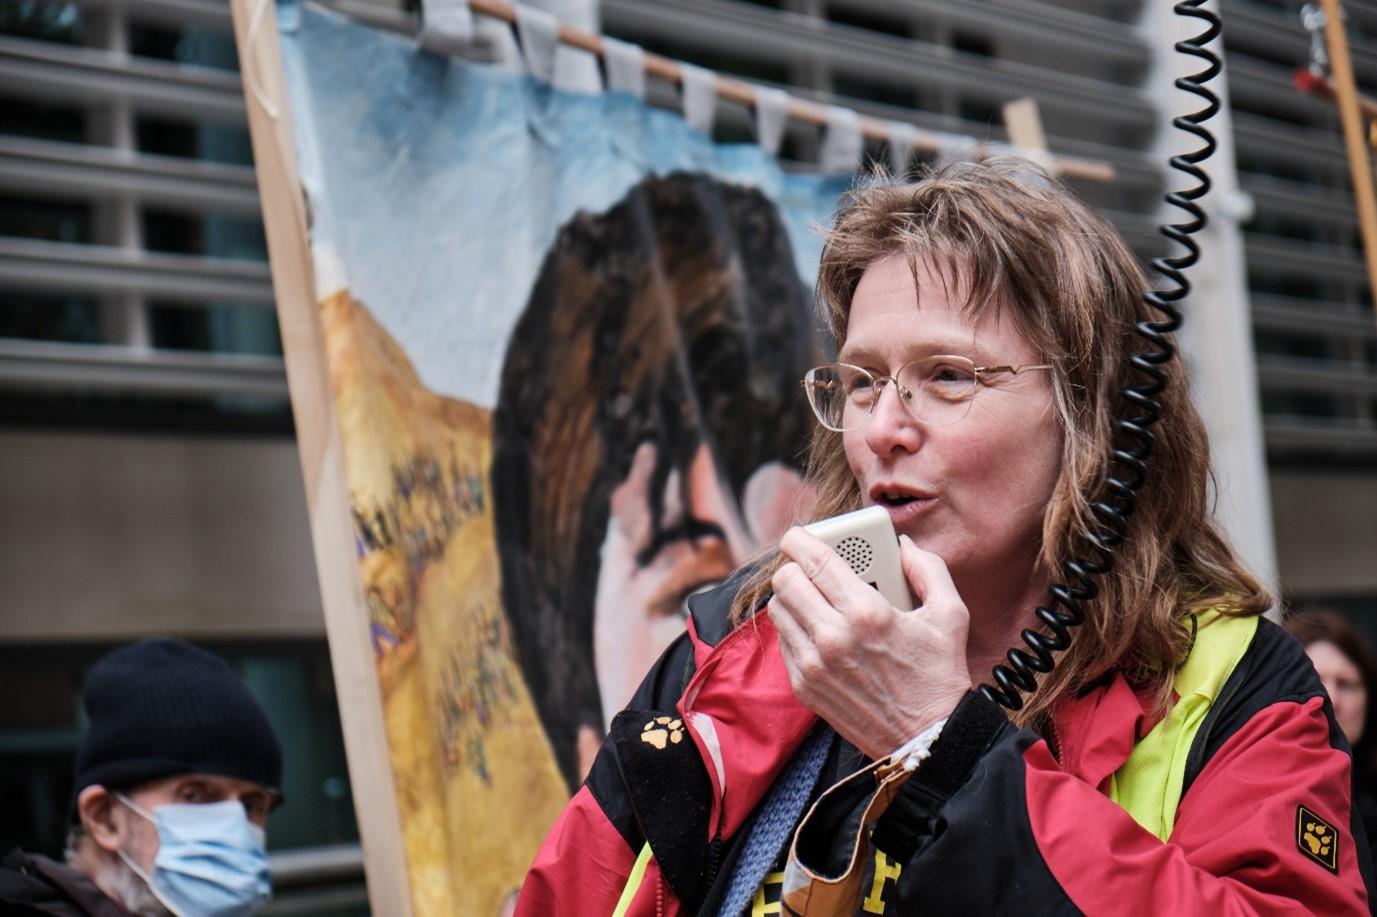 A women speaking into a megaphone with back drop behind